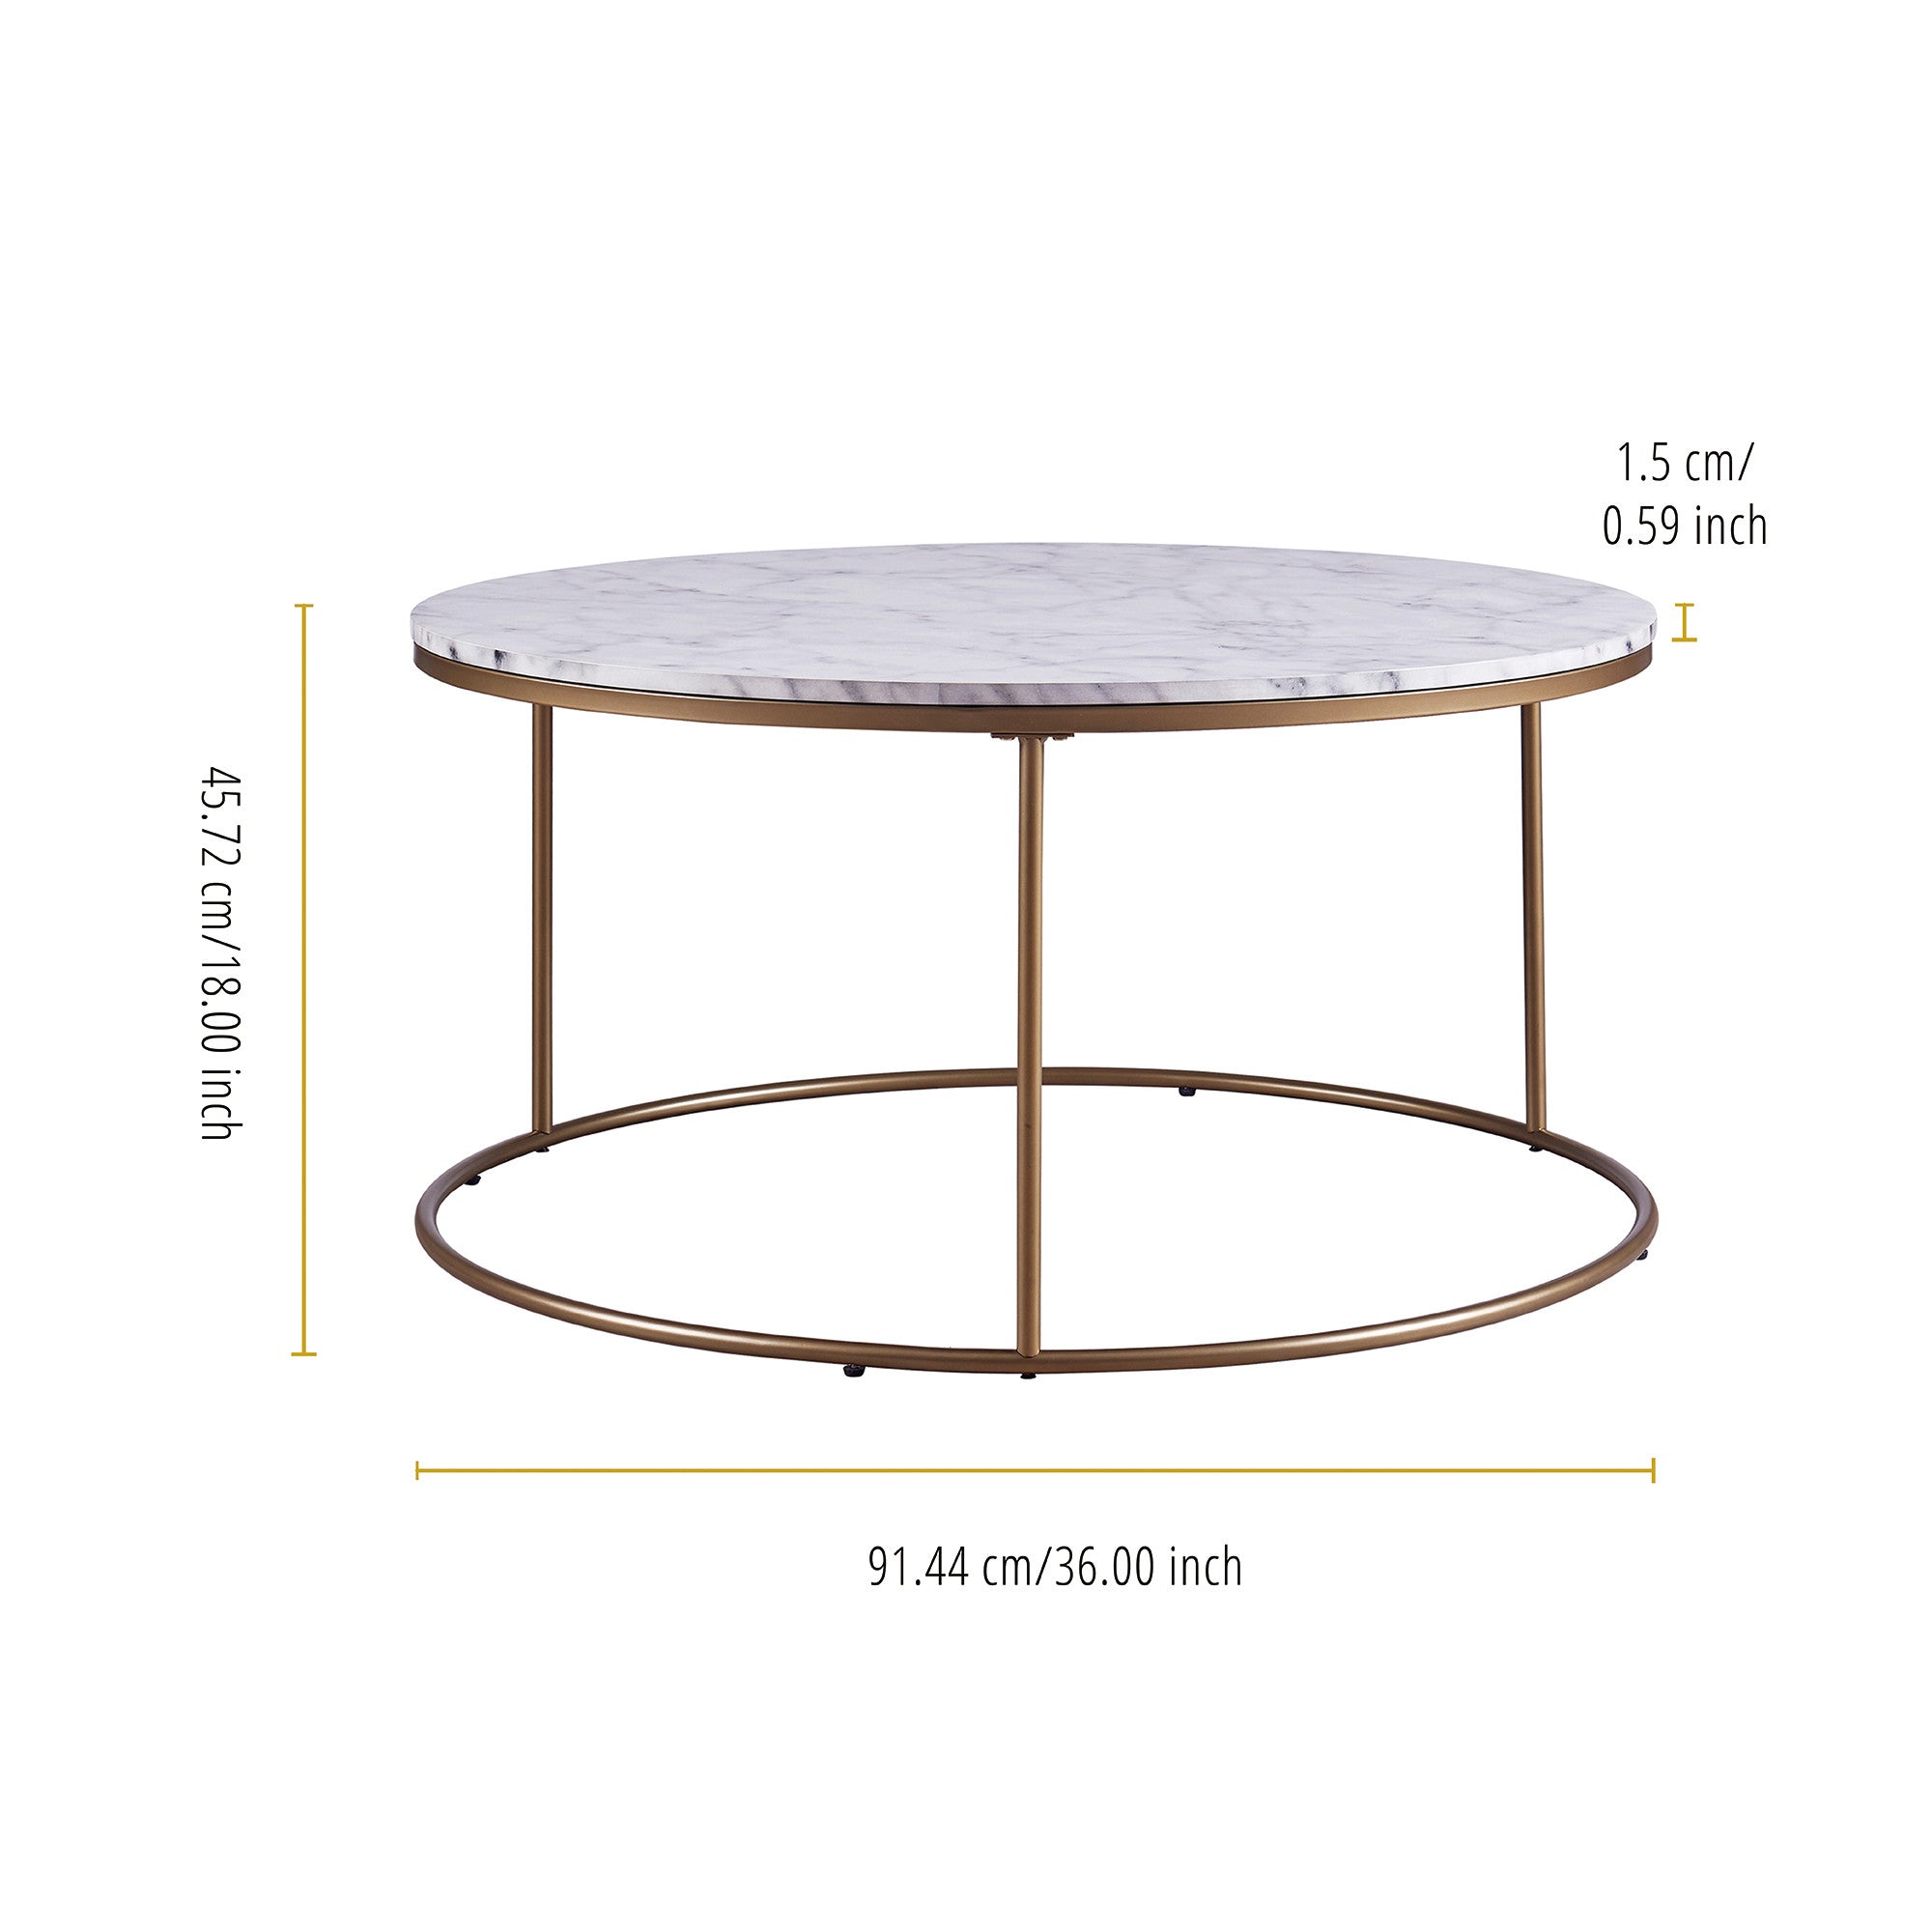 Teamson Home Marmo Modern Marble-Look Round Coffee Table, Marble/Brass